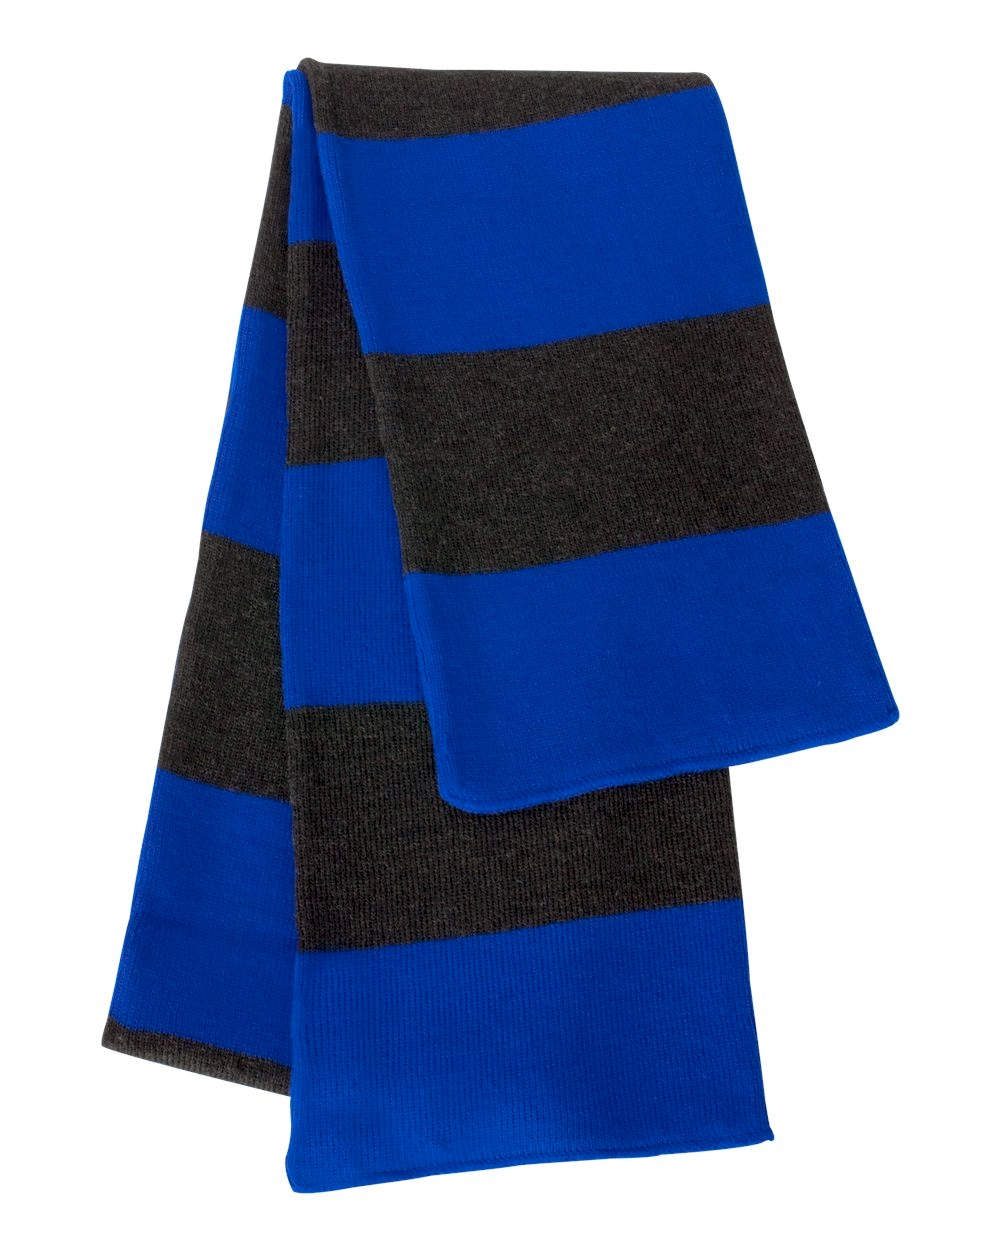 Rugby Striped Knit Scarf Embroidery Blanks - ROYAL/CHARCOAL